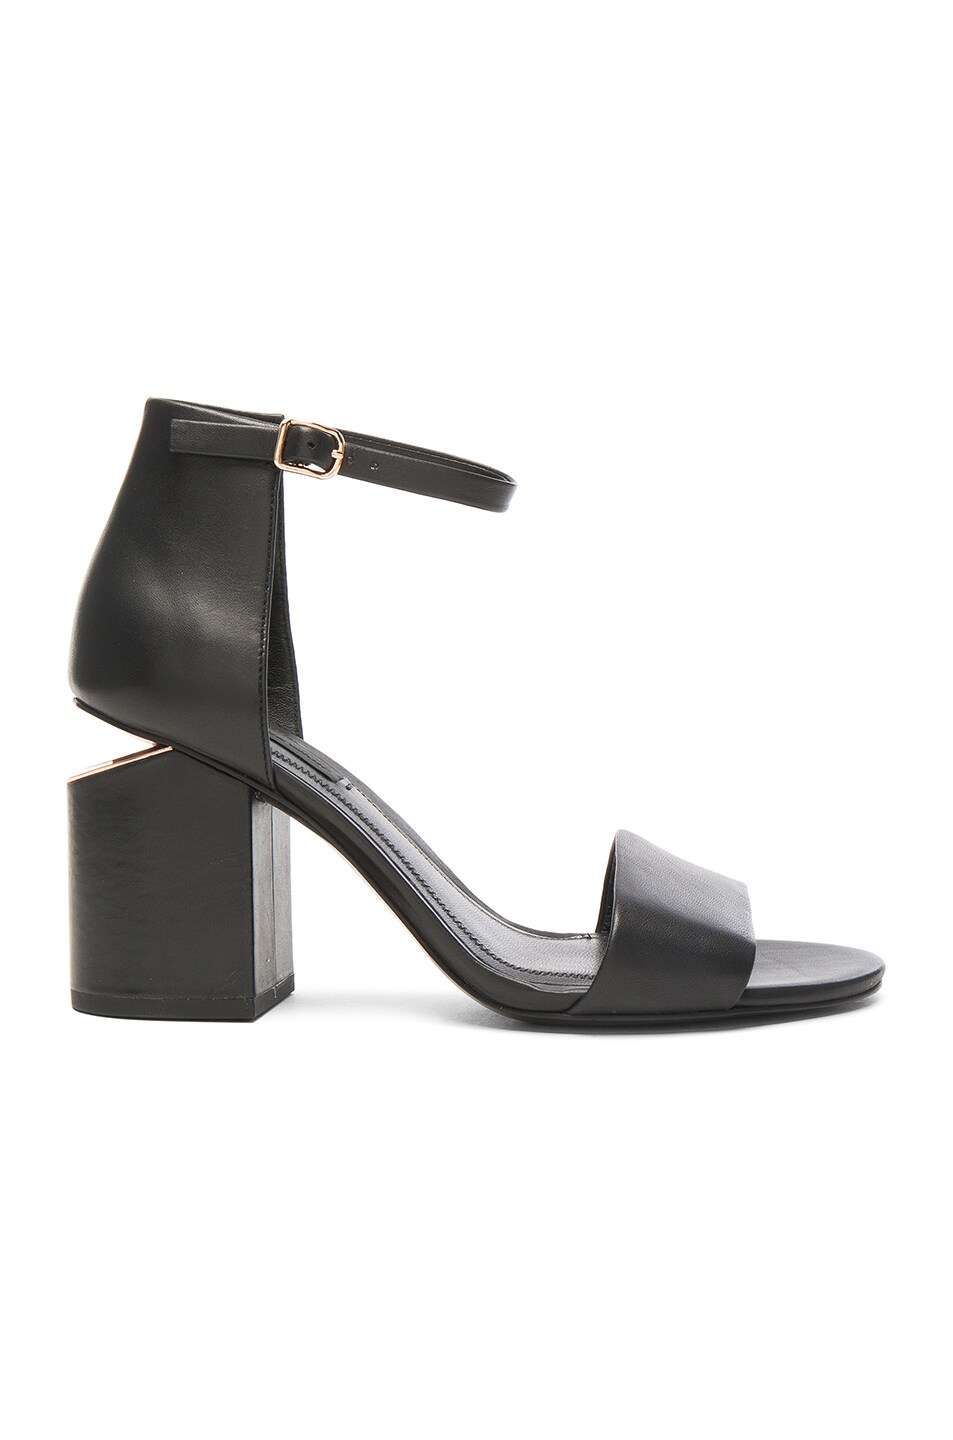 Image 1 of Alexander Wang Leather Abby Heels in Black & Rose Gold